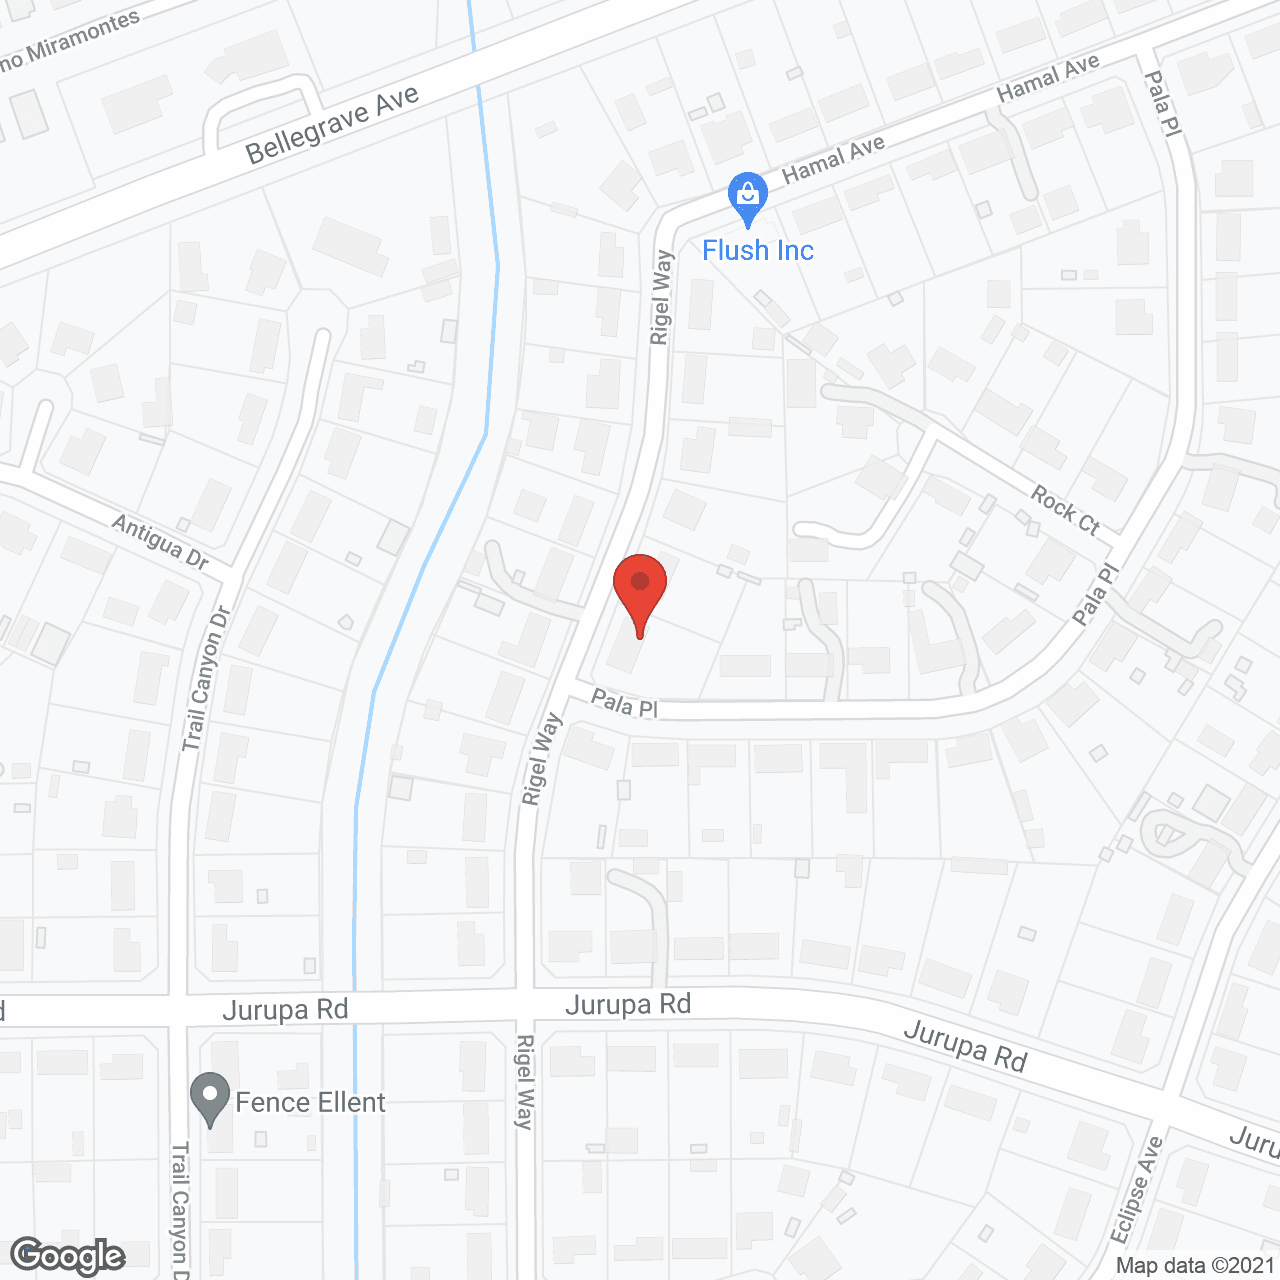 Gracious Care Home in google map